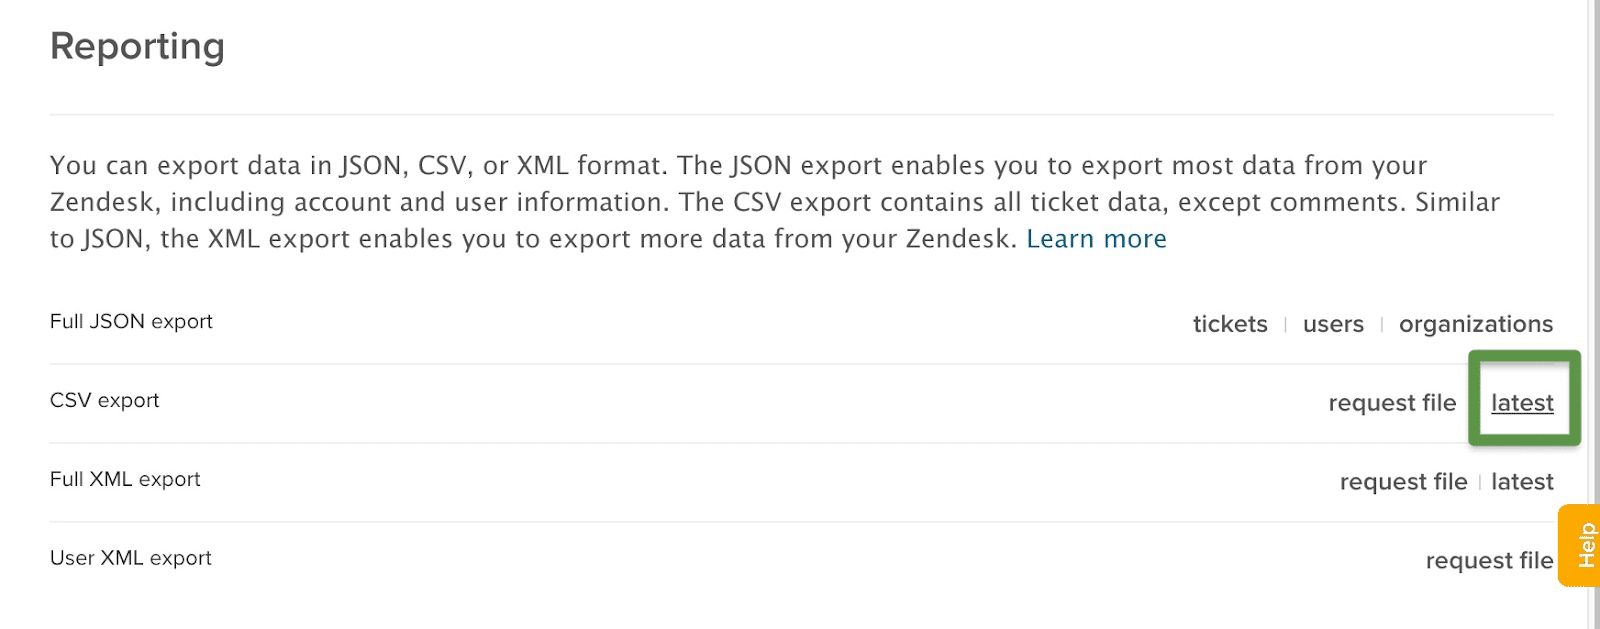  click on latest on the far right side of CSV export to download the newest export.